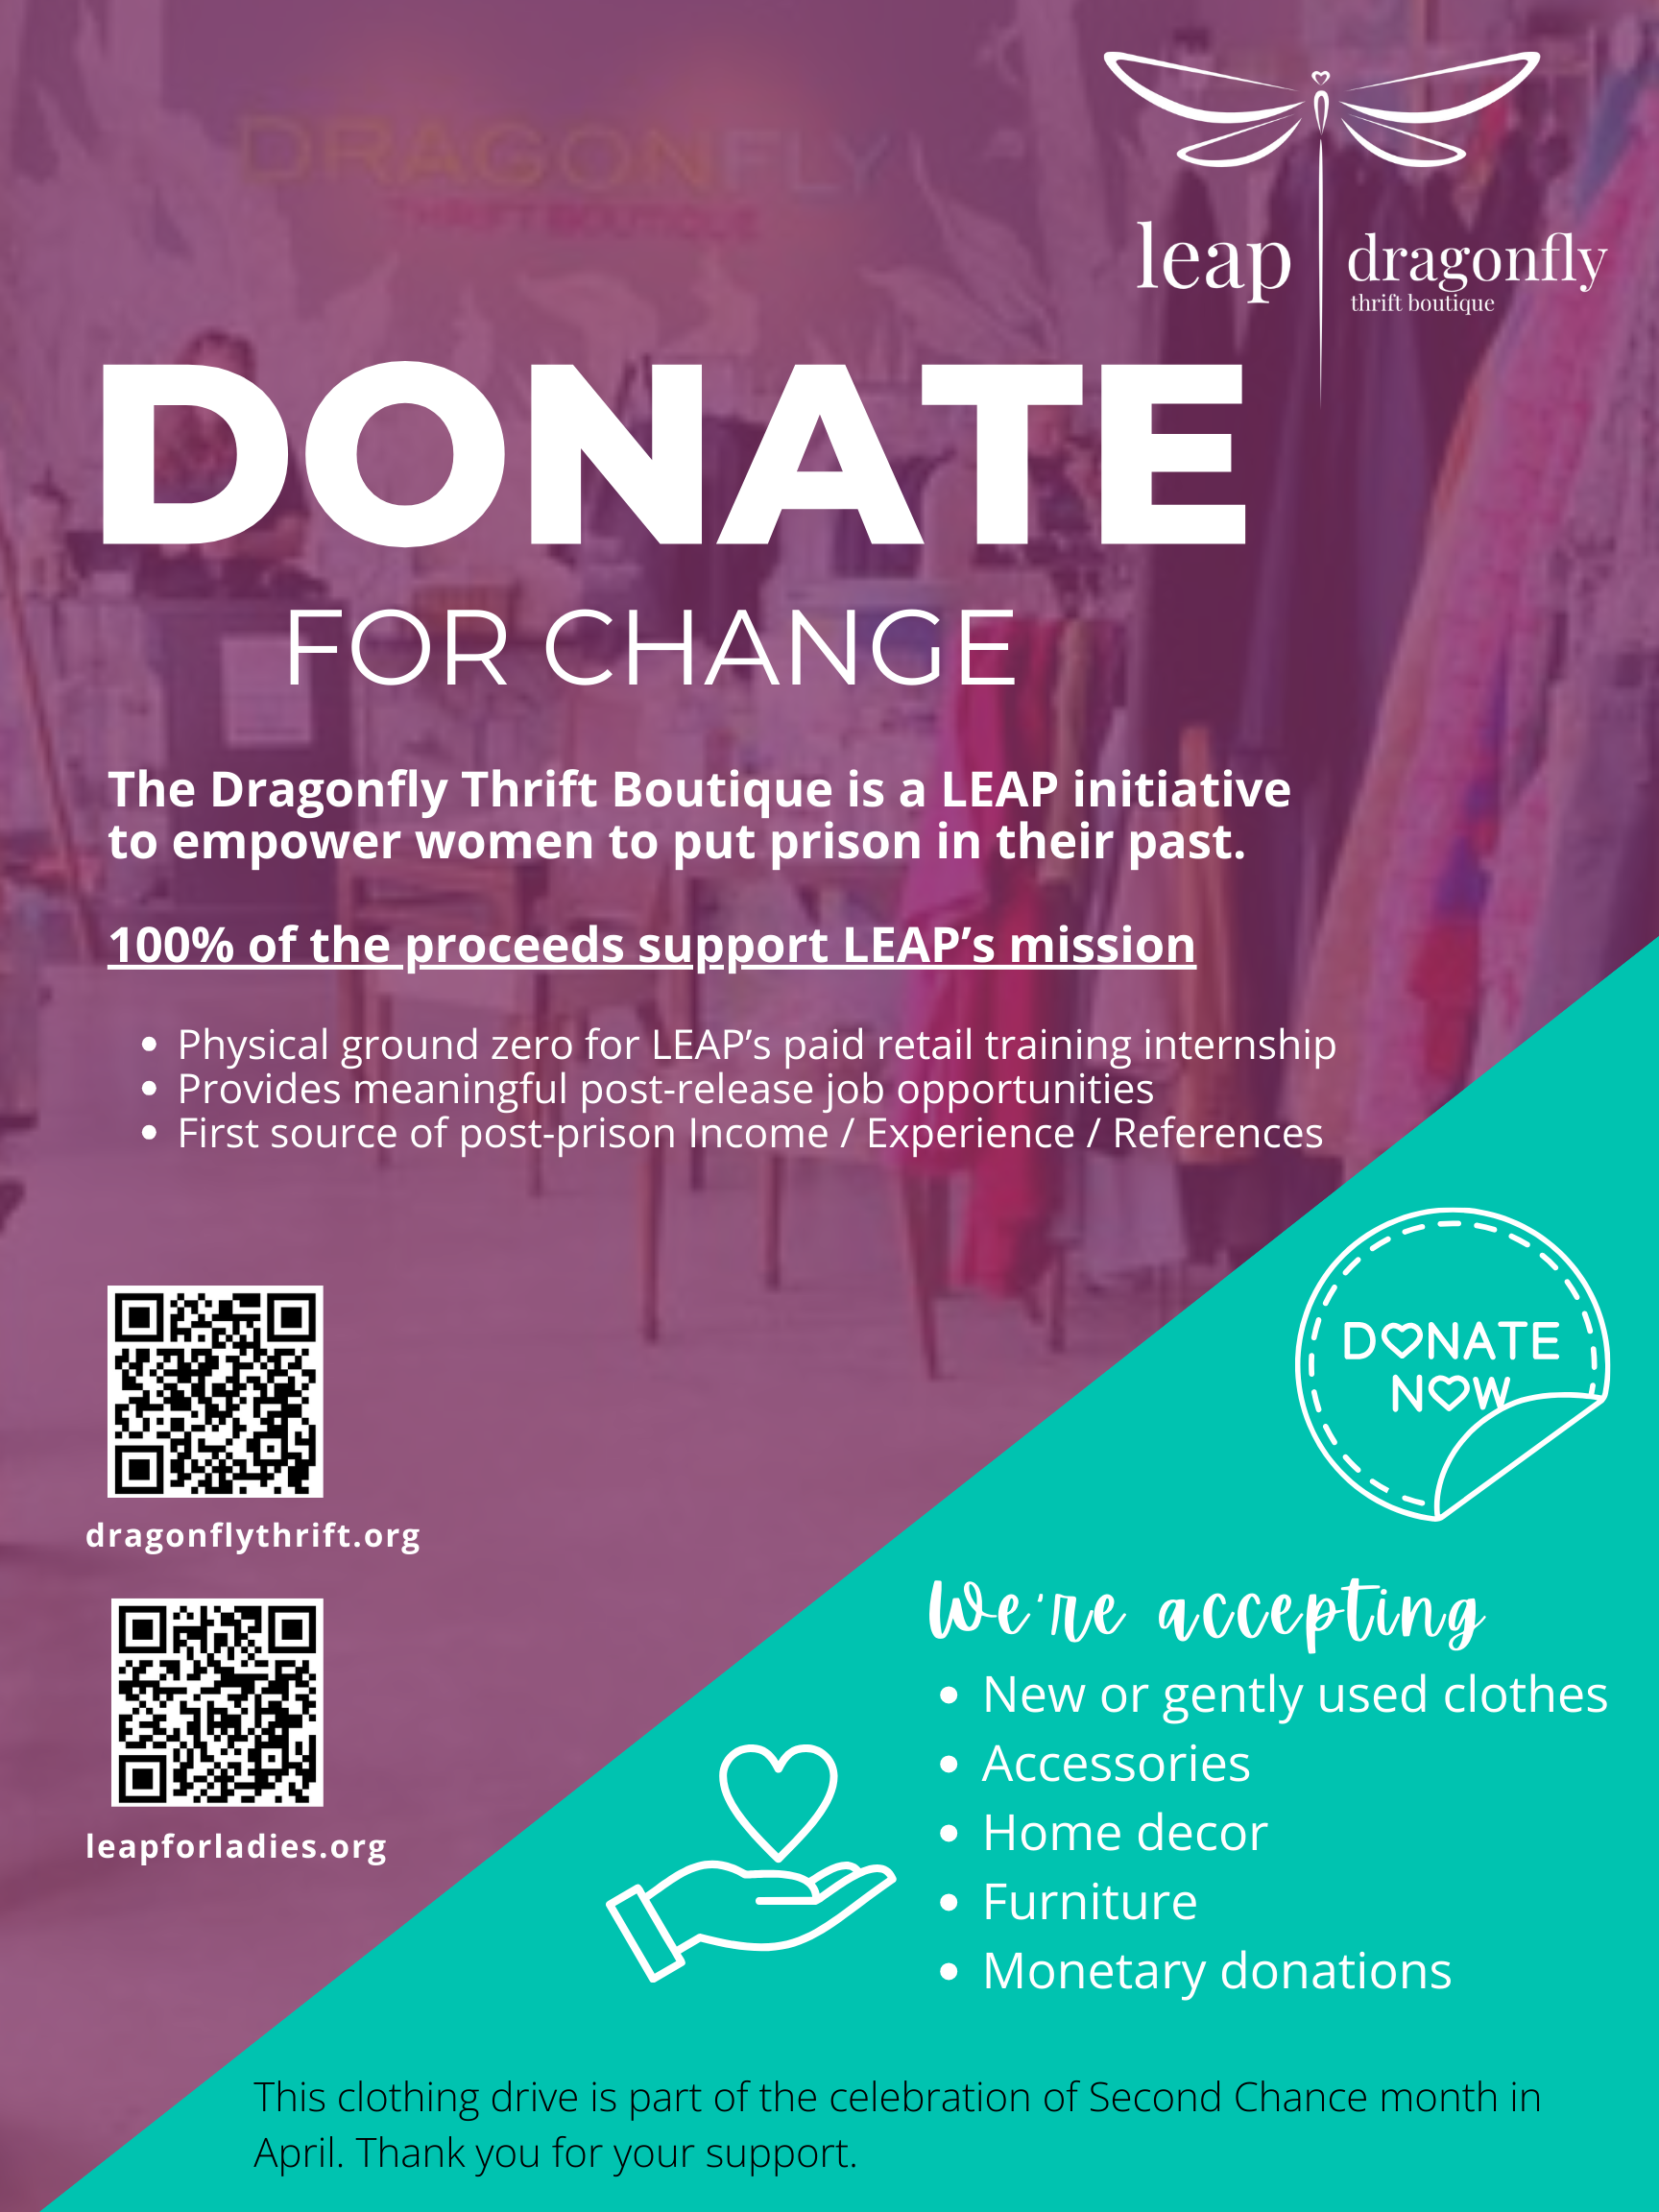 Second Chance Month Clothing Drive Begins @ LEAP Women's Reentry Hub